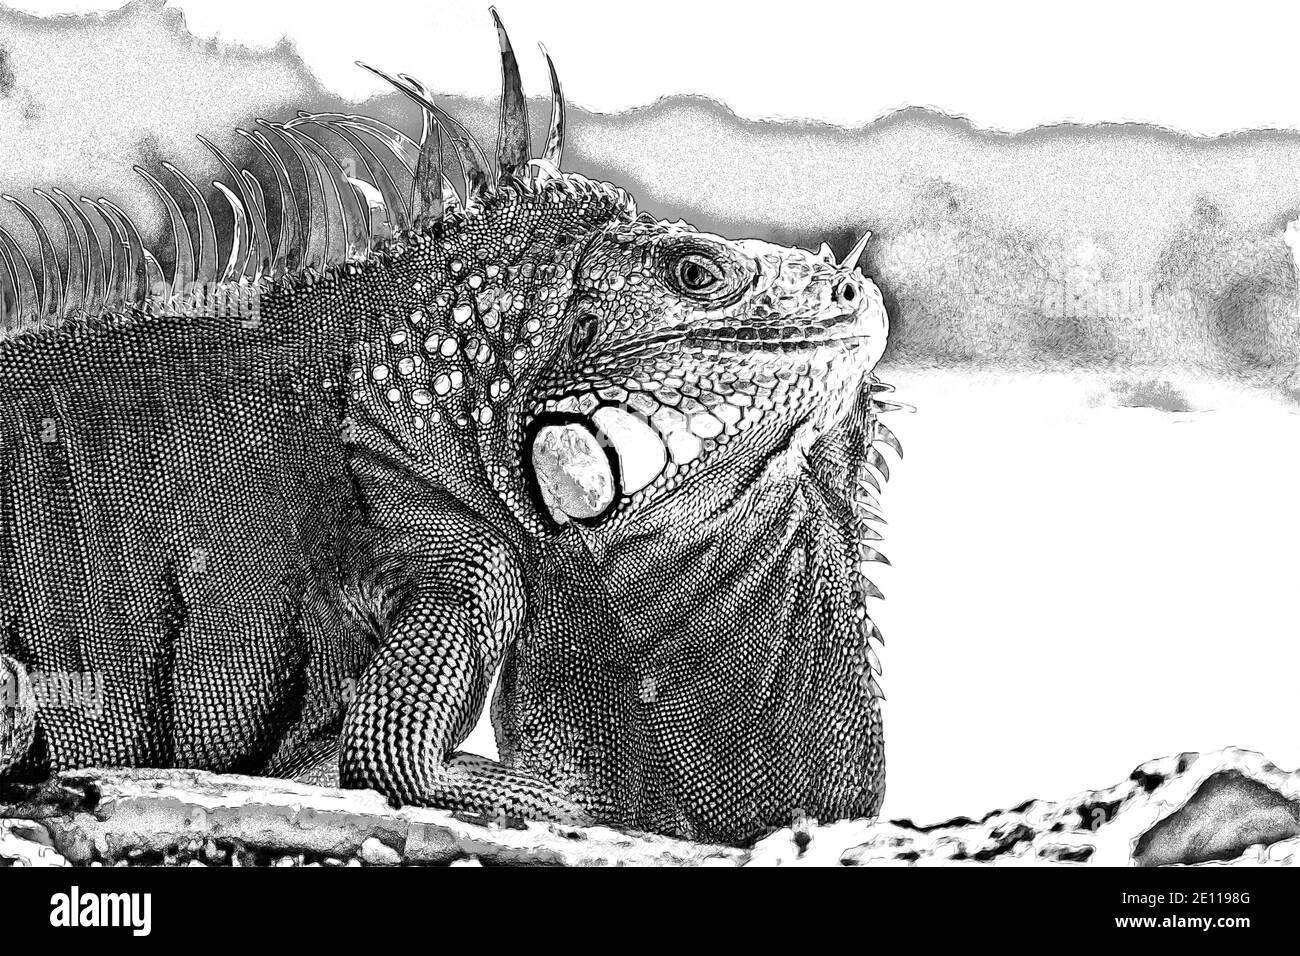 Grayscale photo illustration of an orange iguana sunning itself in a gun port of the Civil War Fort Zachary Taylor in Key West, the Florida Keys. Stock Photo